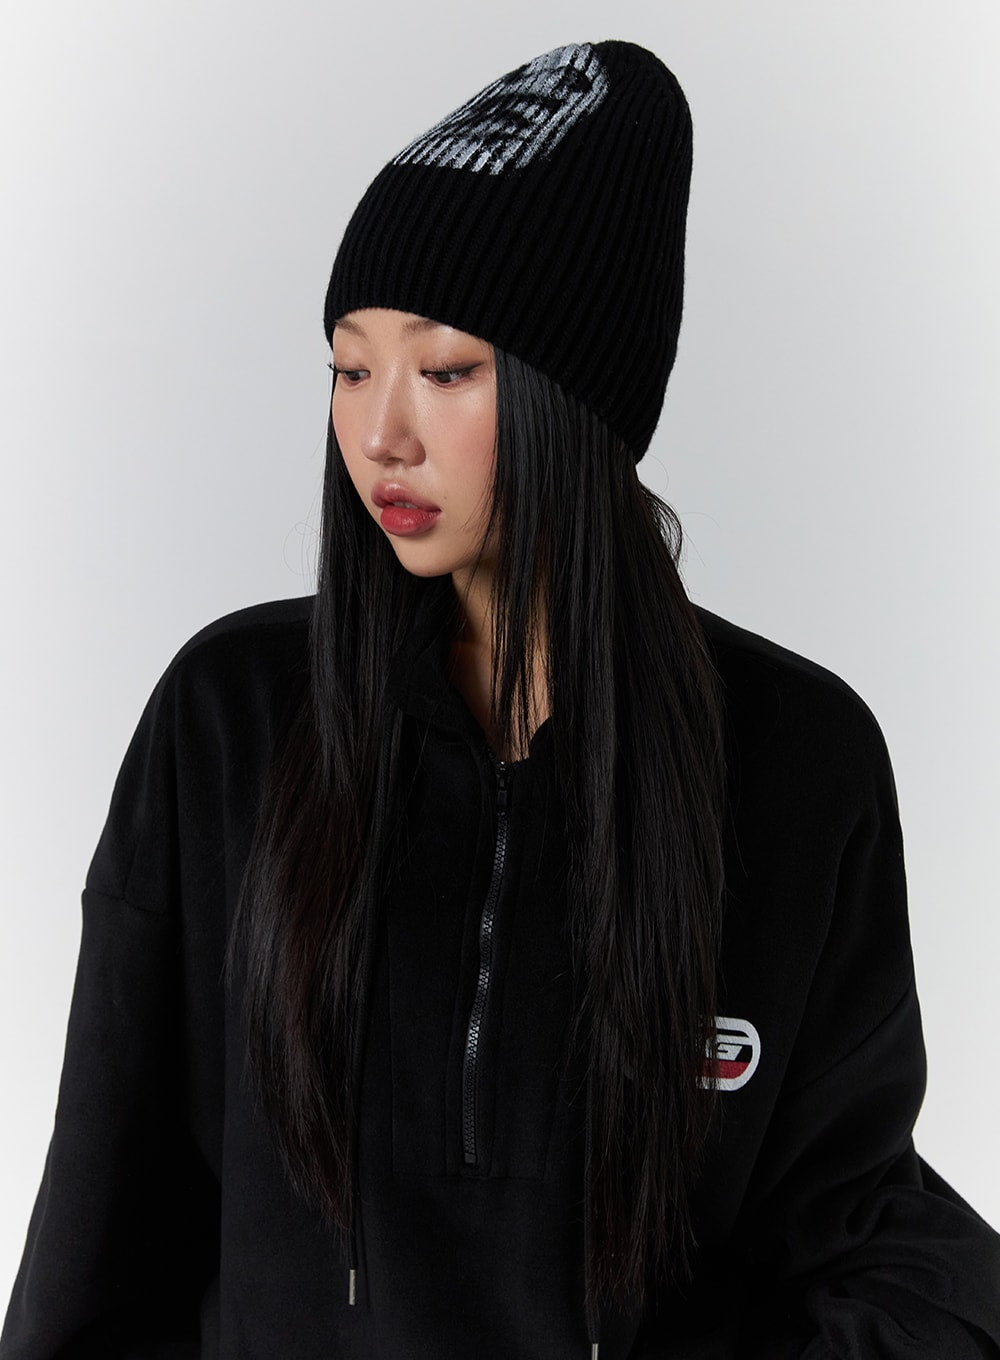 graphic-solid-beanie-cd329